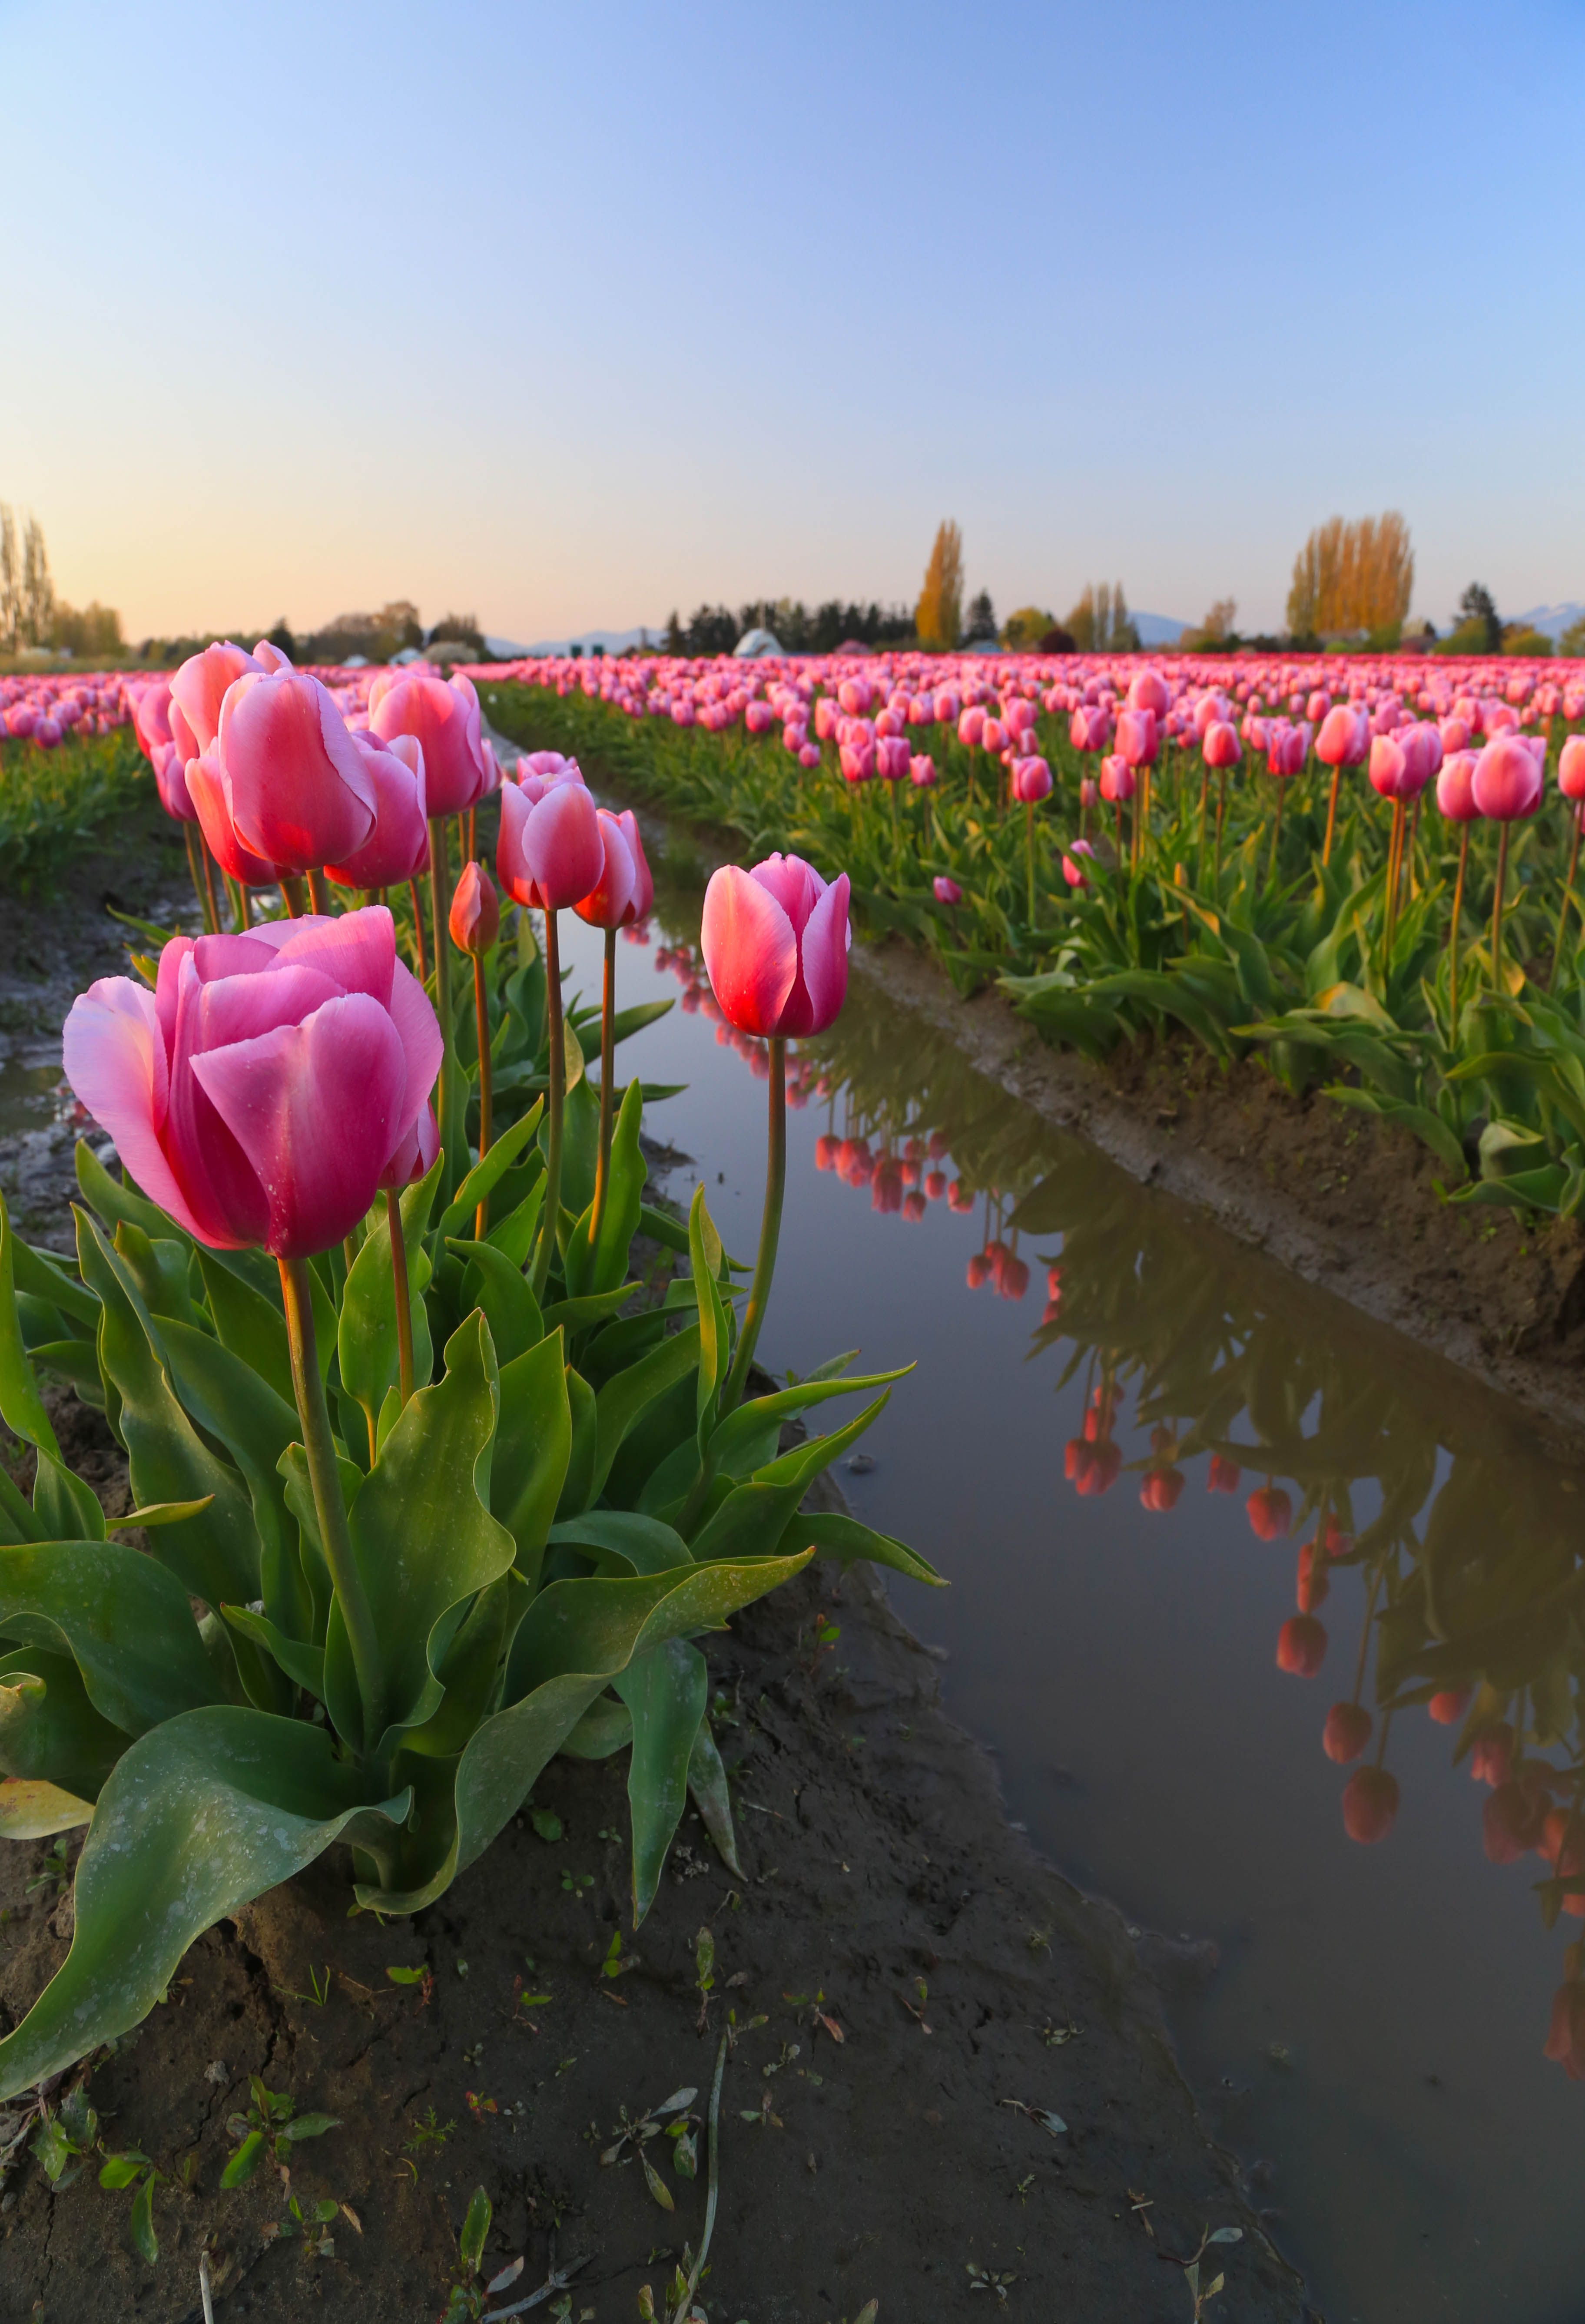 SKAGIT VALLEY TULIP FESTIVAL - Andy Porter Images3648 x 5350